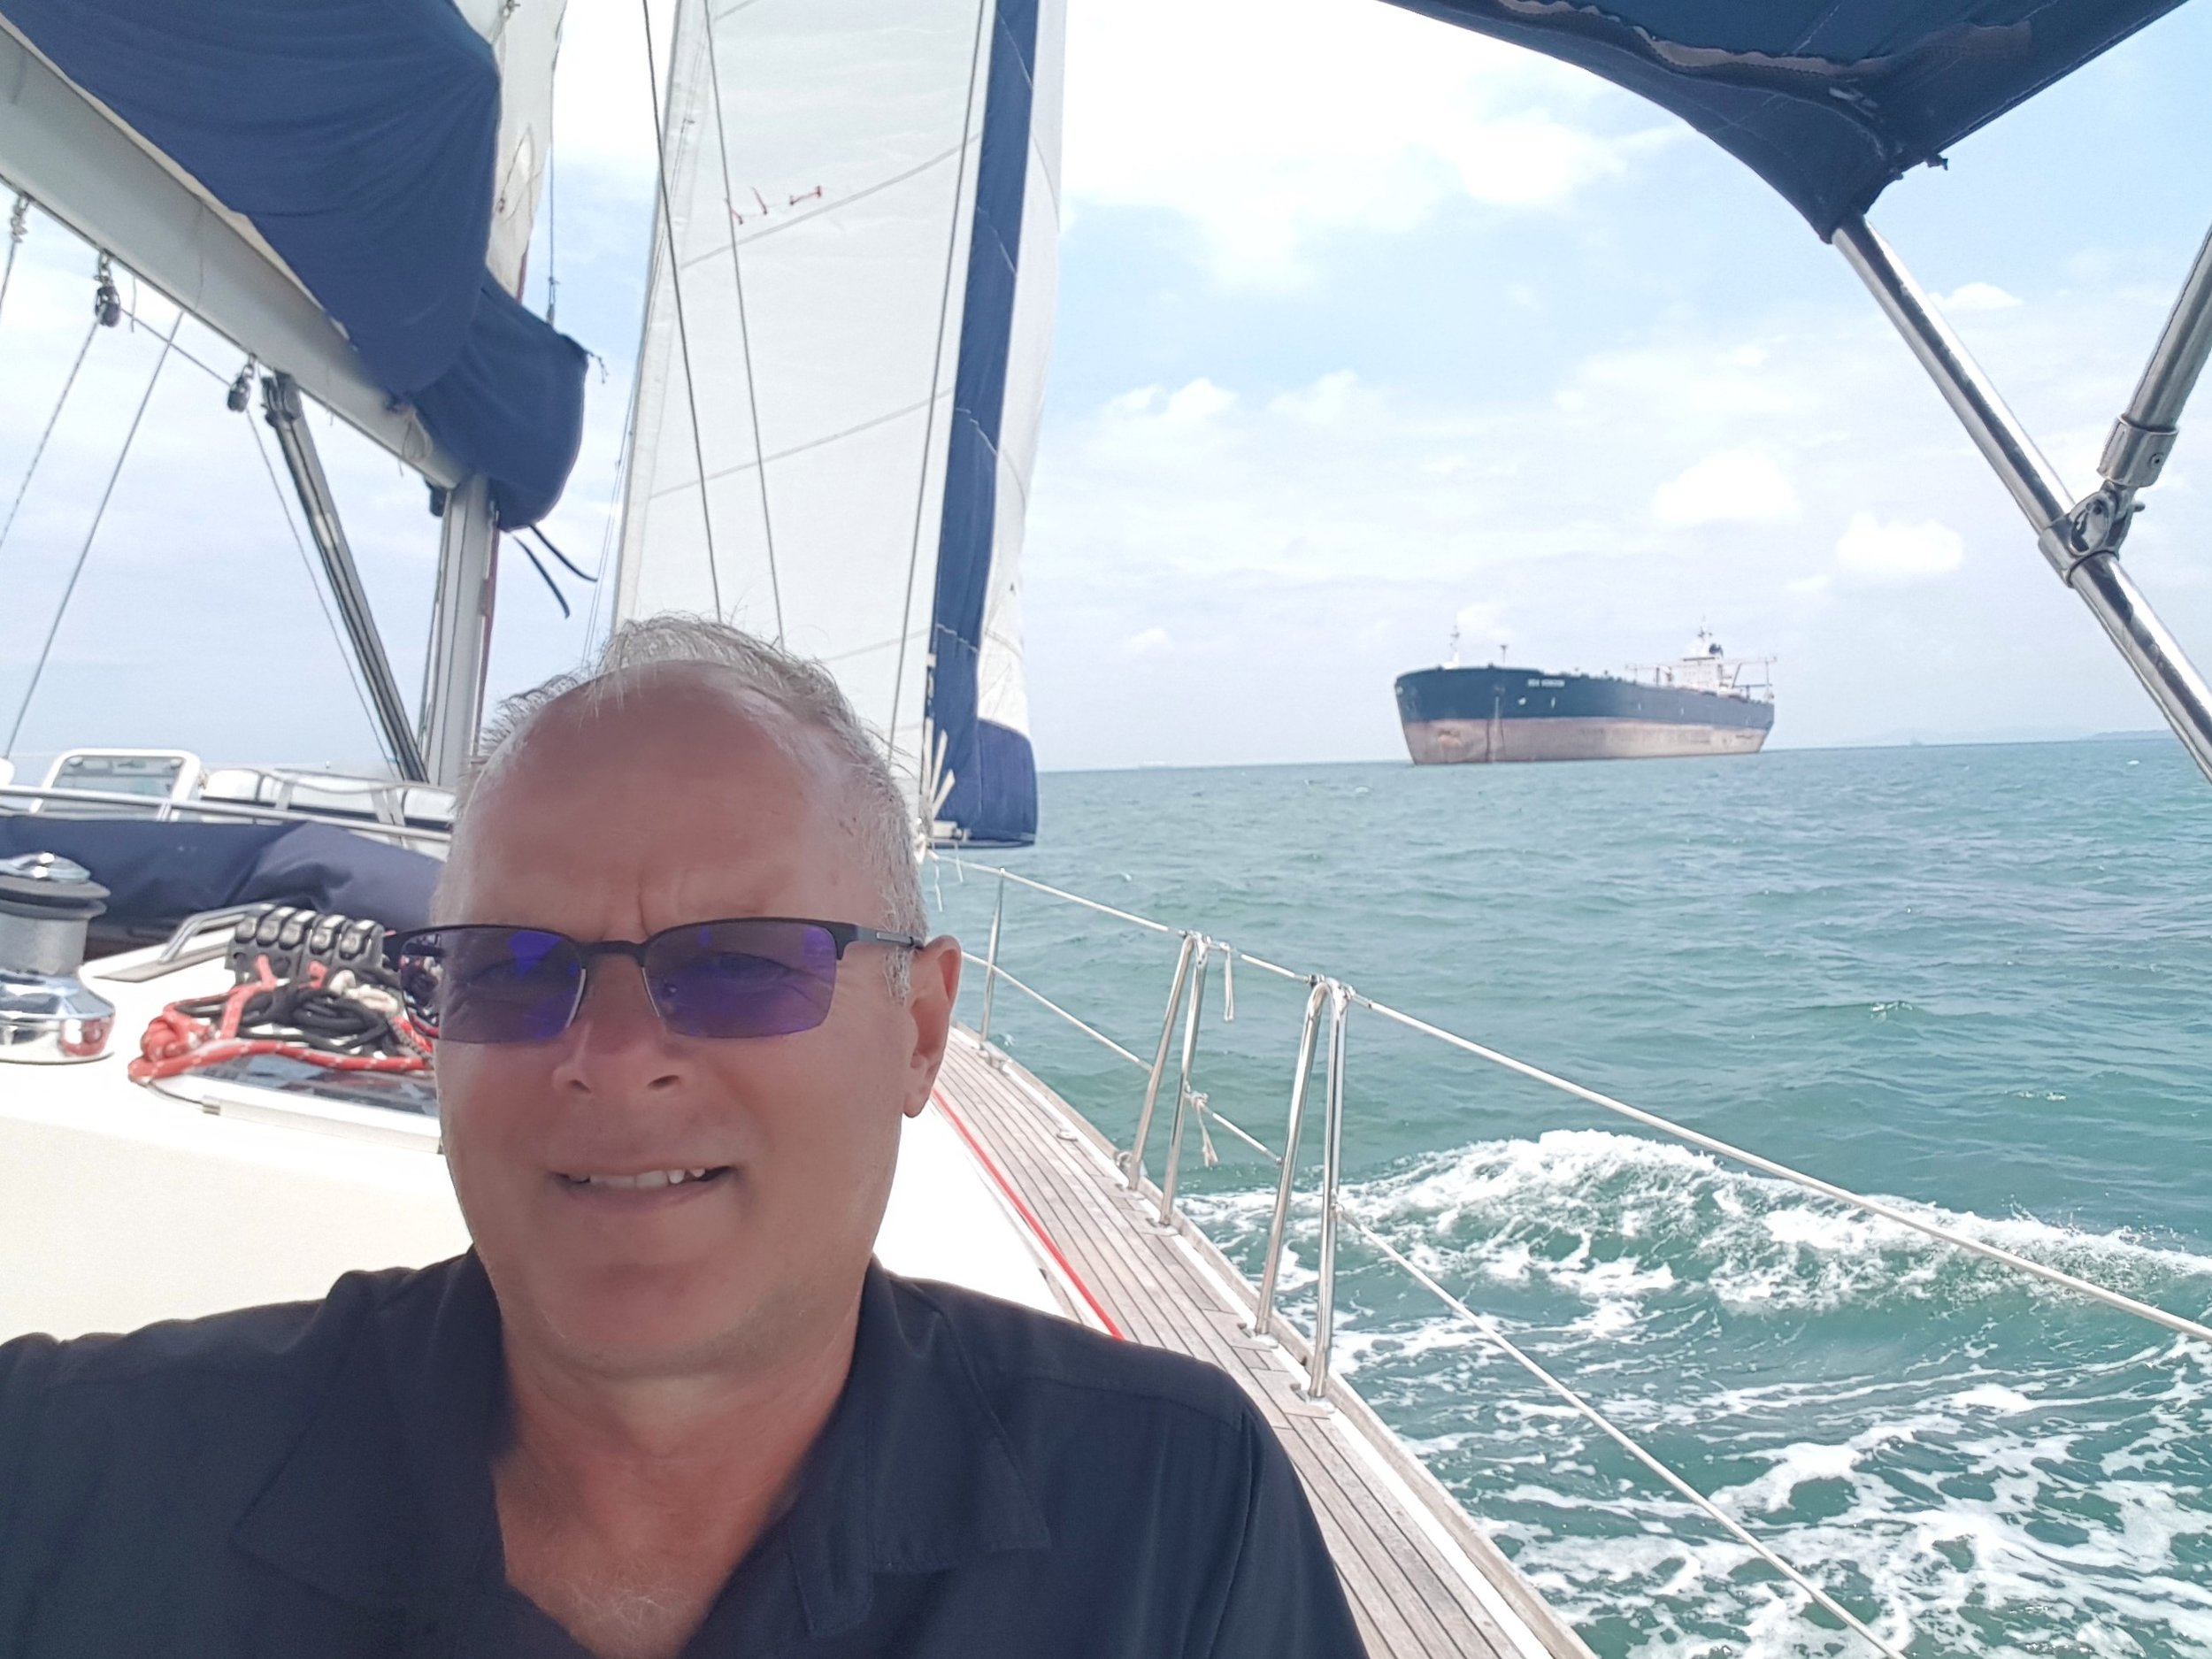 Strait of Malacca: manoeuvering between oiltankers